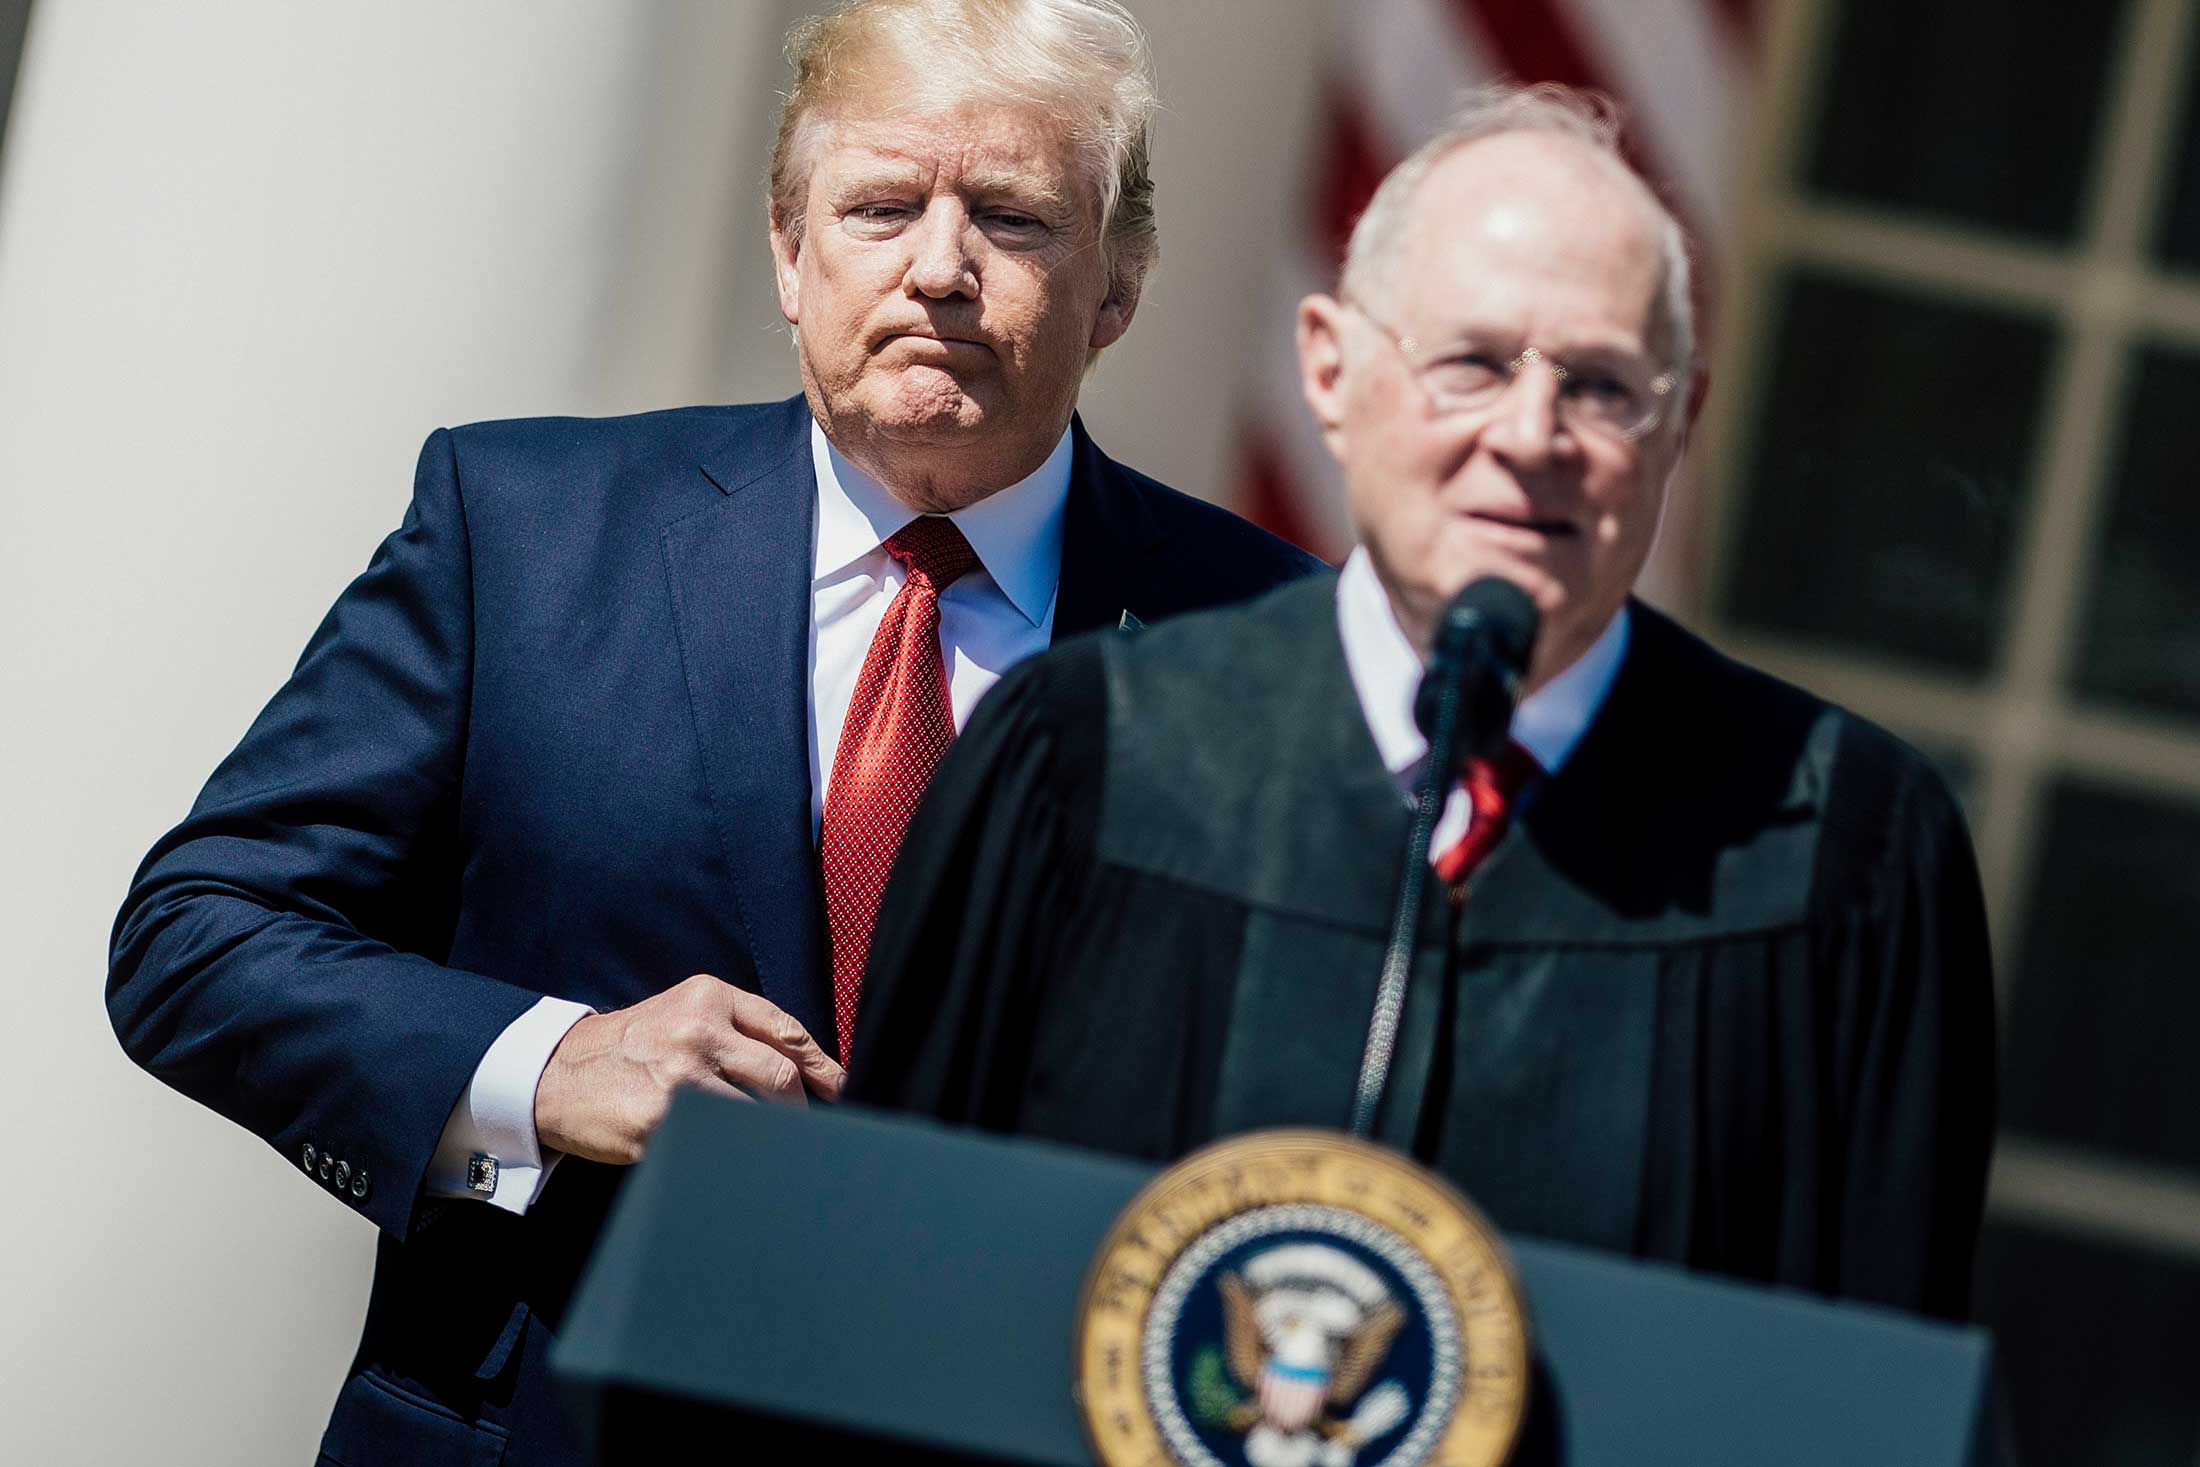 President Donald Trump listens while Supreme Court Justice Anthony Kennedy speaks during a ceremony at the White House on April 10, 2017.